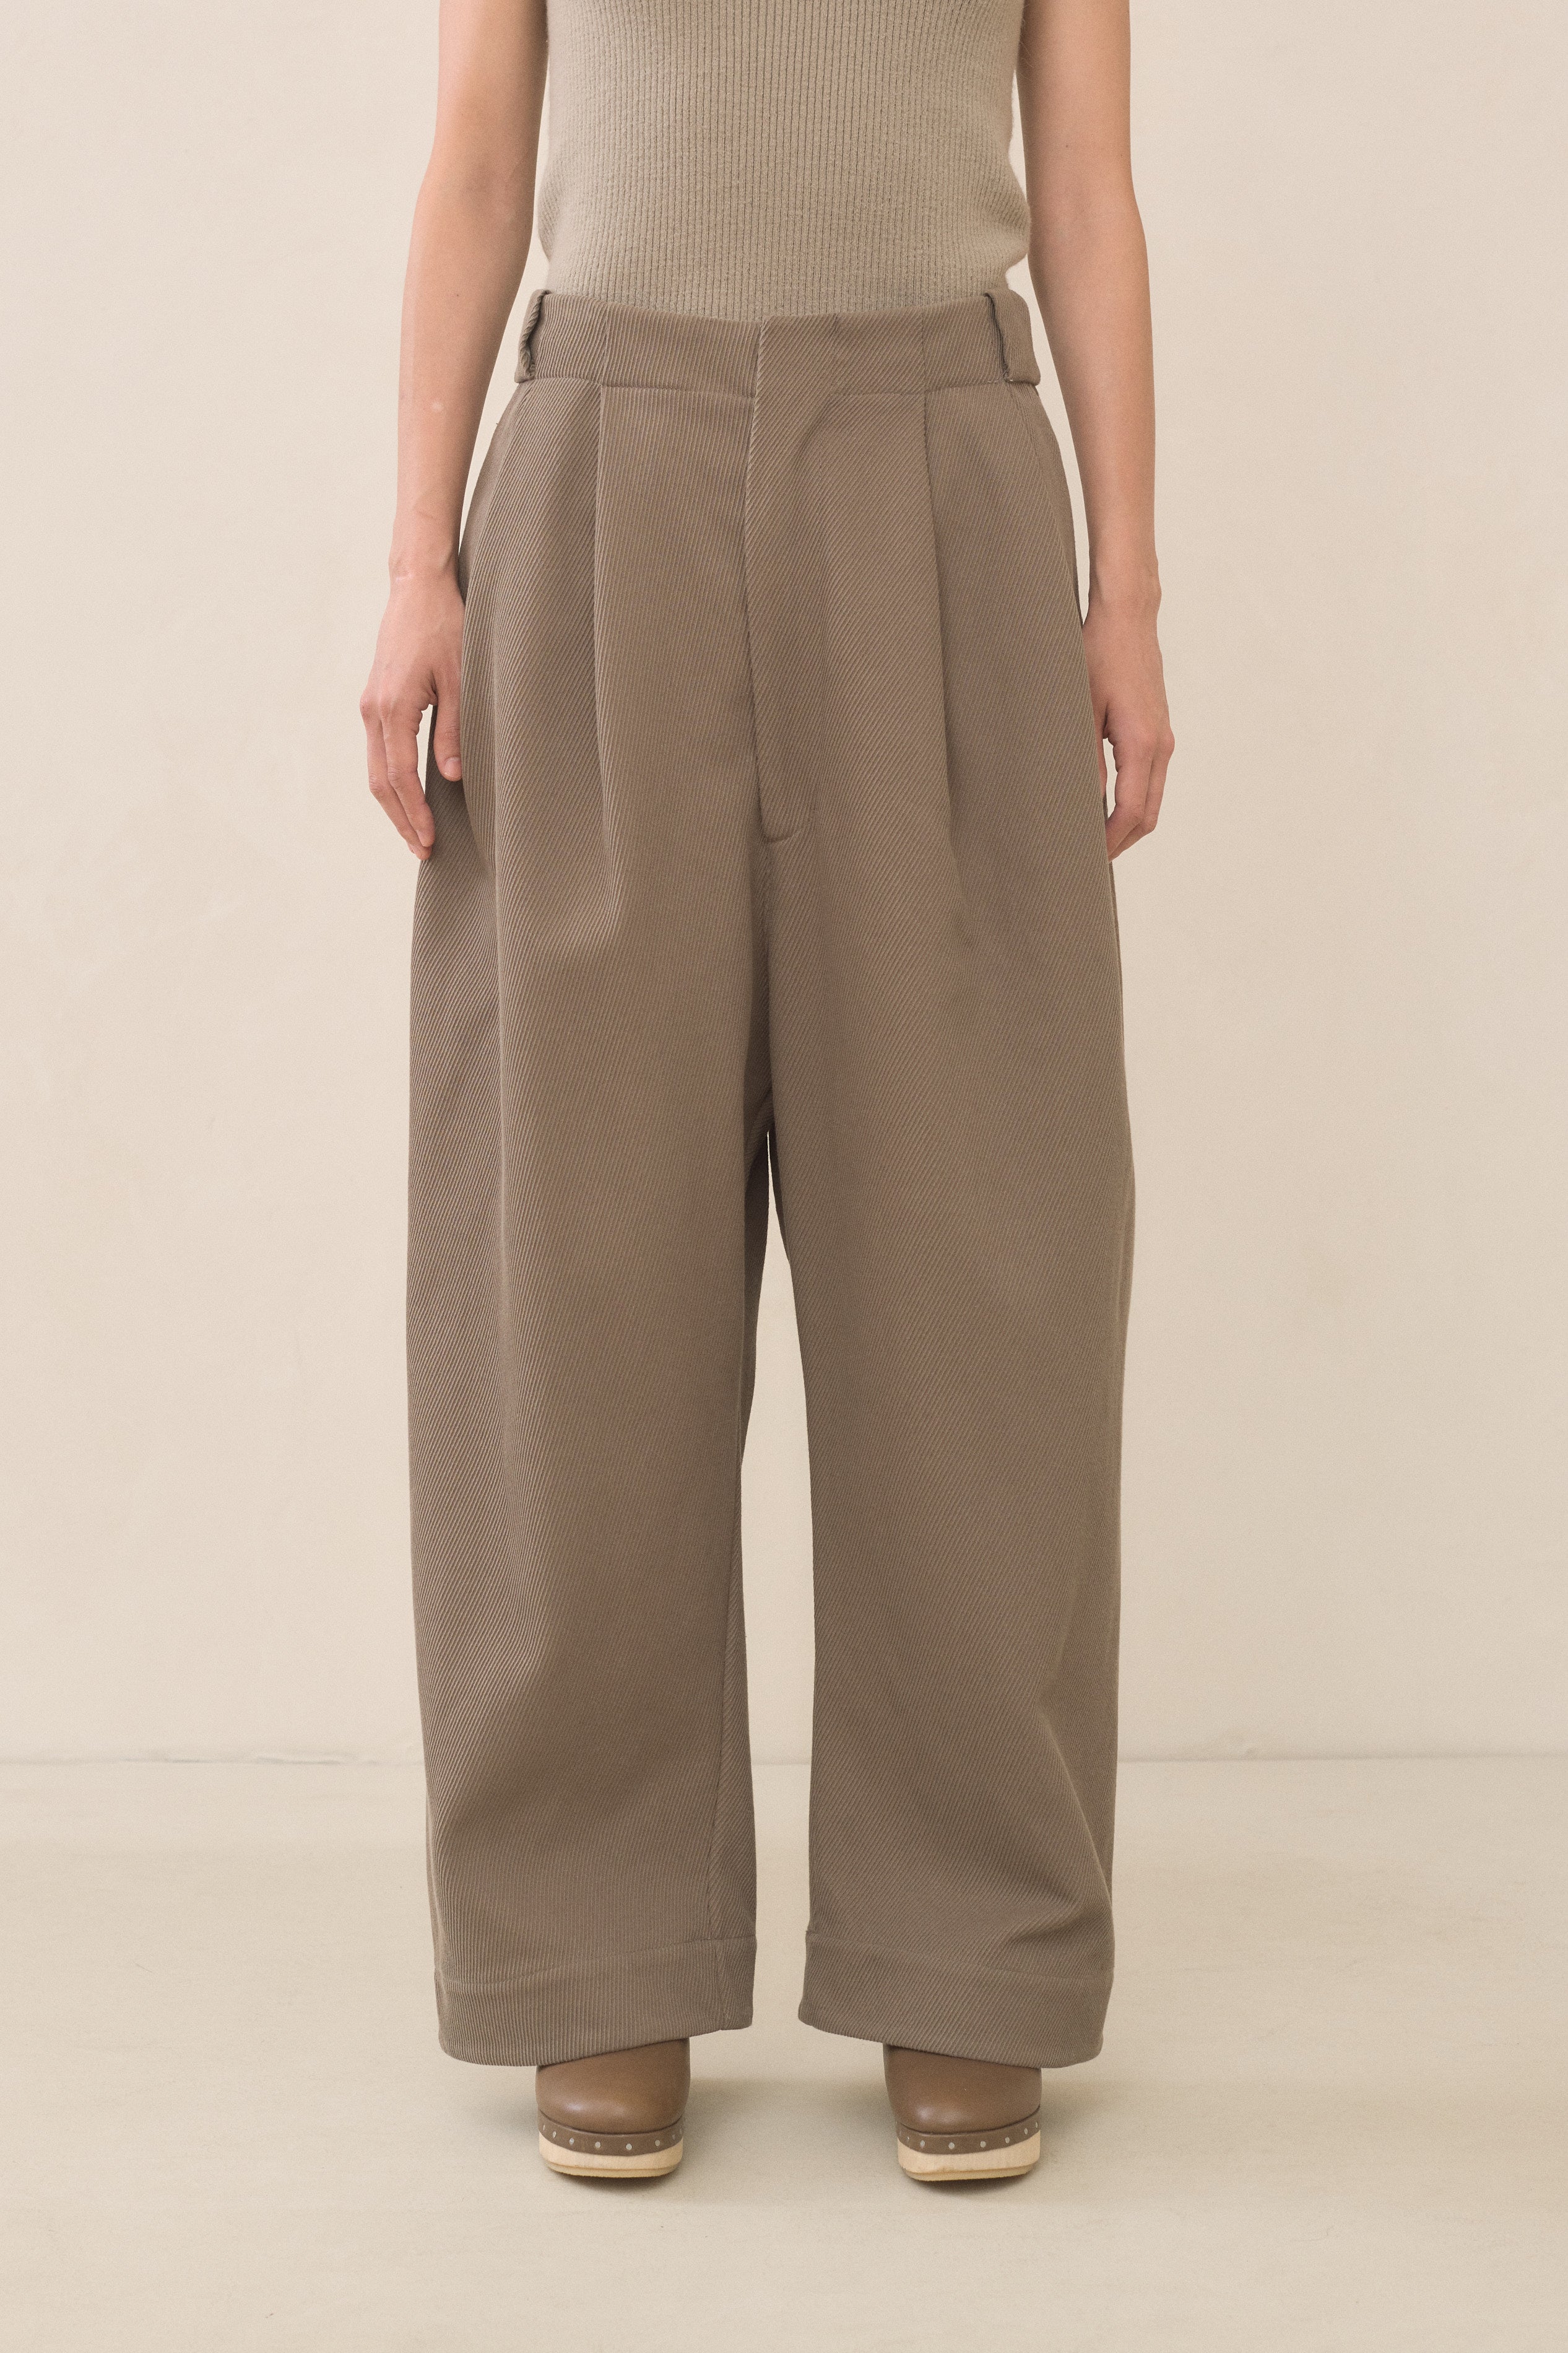 Willi Smith trousers in pink cotton twill — eigenmotion